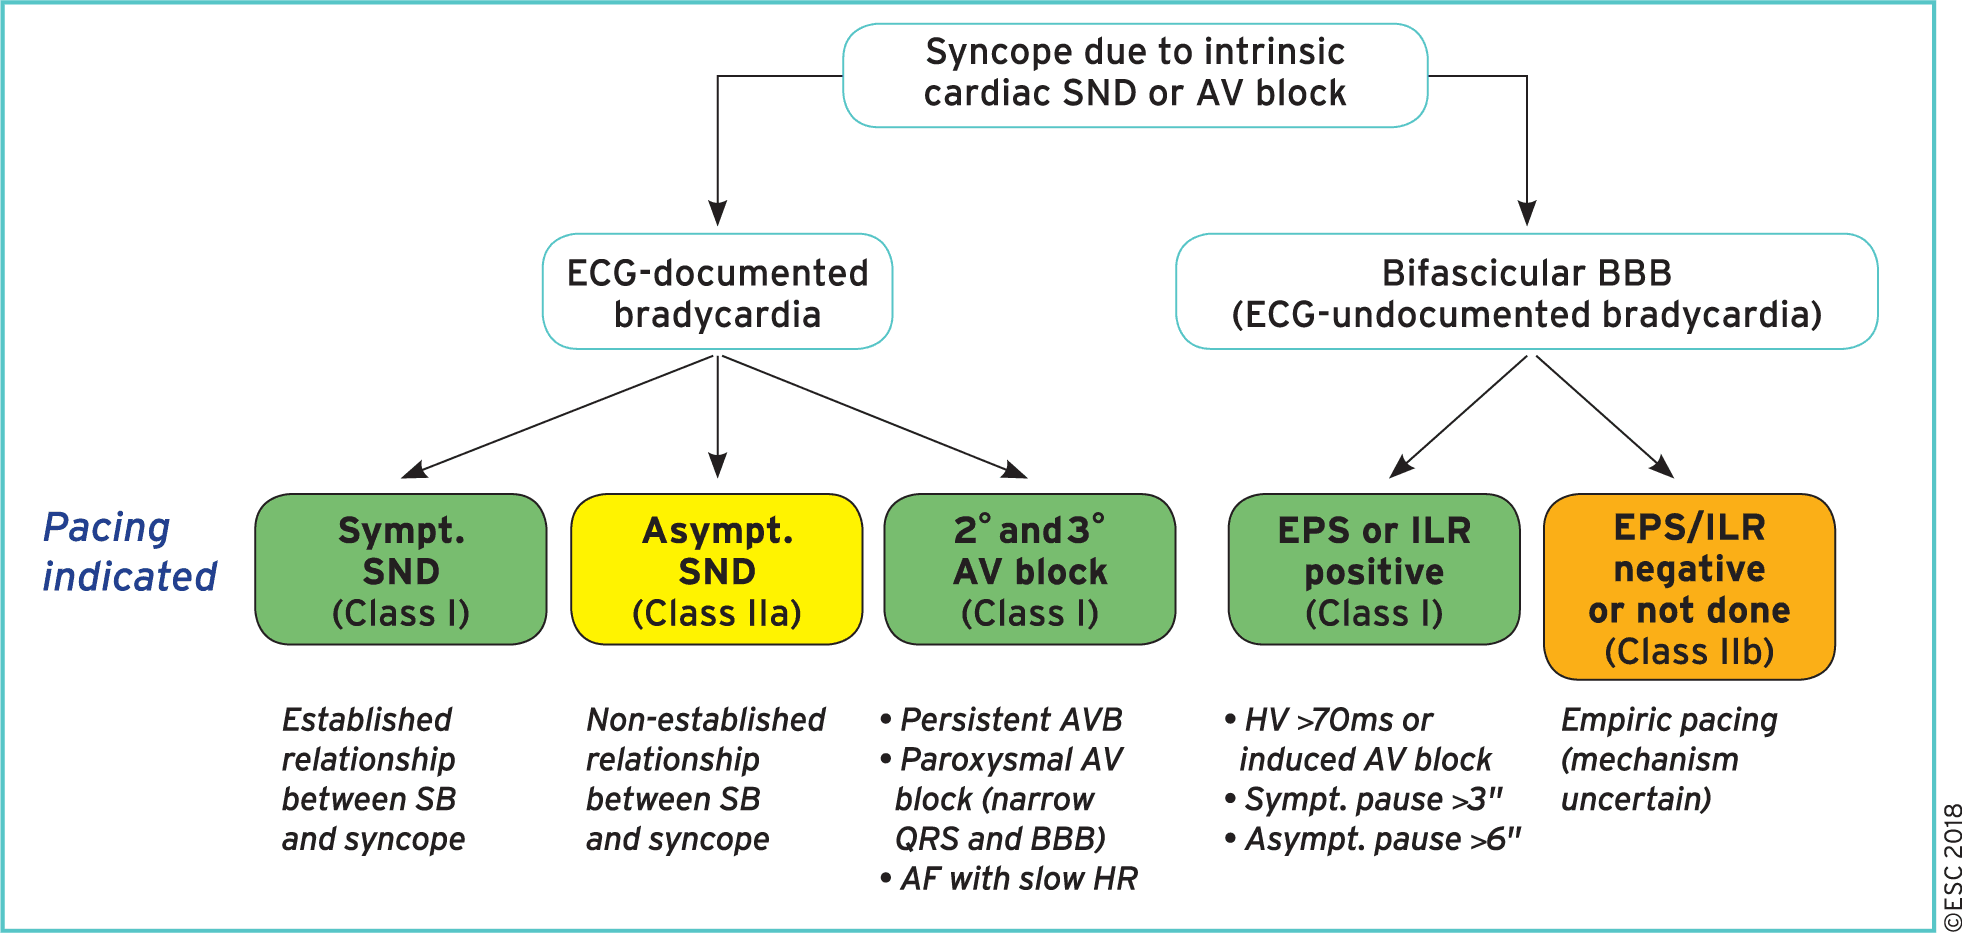 2018 ESC Guidelines for the diagnosis and management of syncope